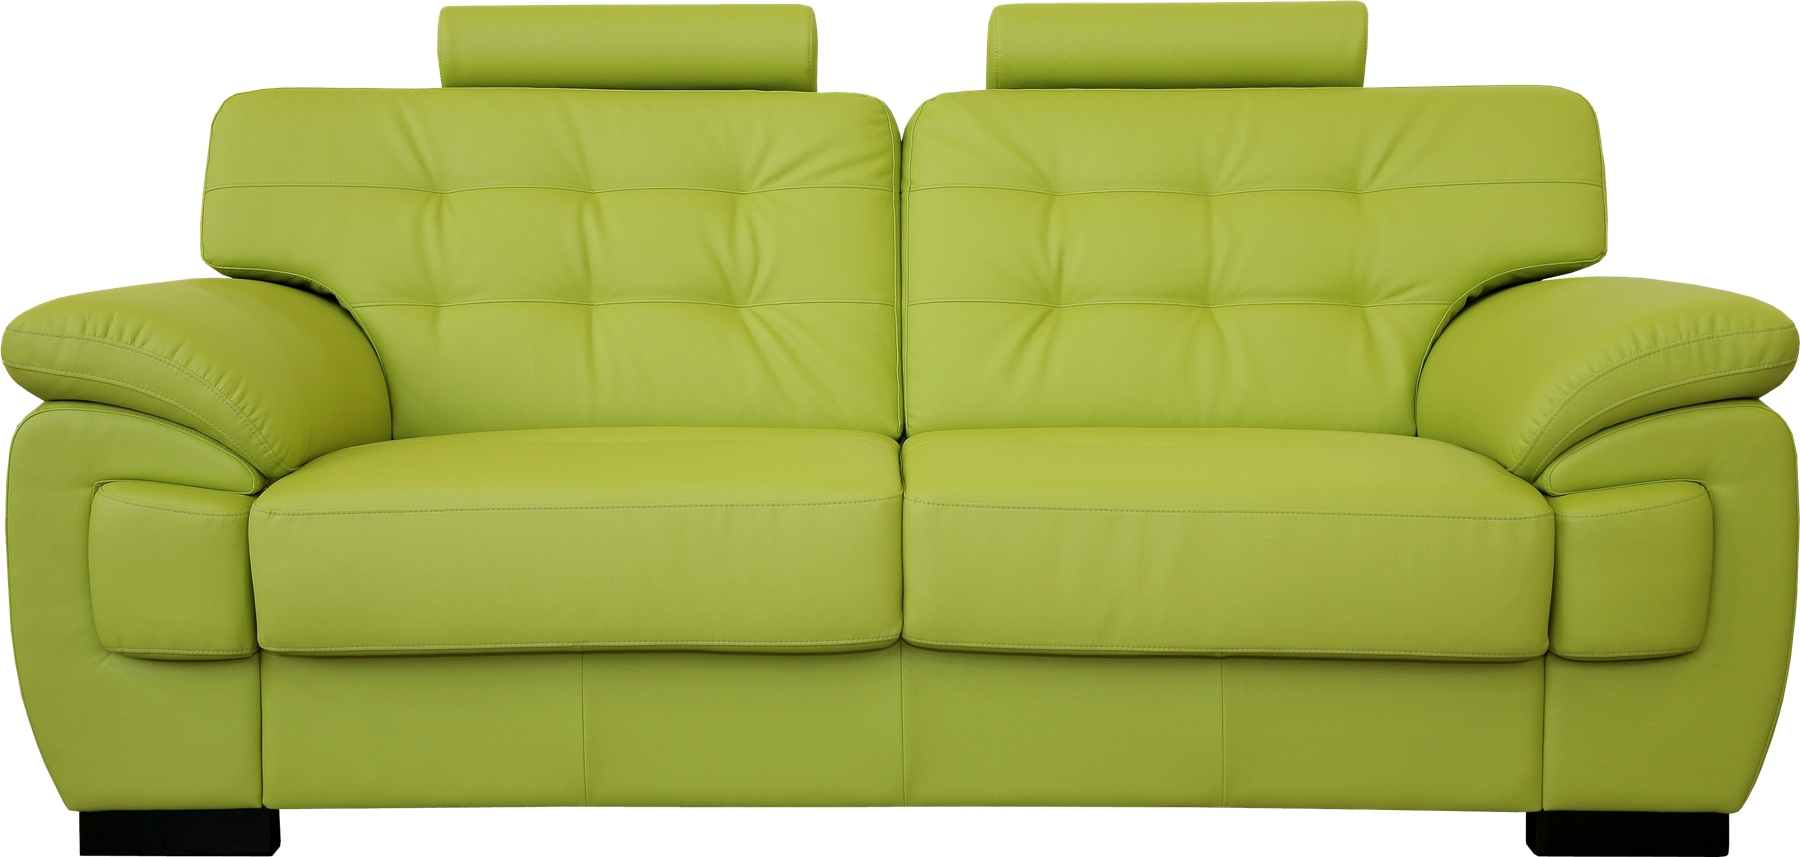 Sofa Bed Free Download PNG HQ PNG Image